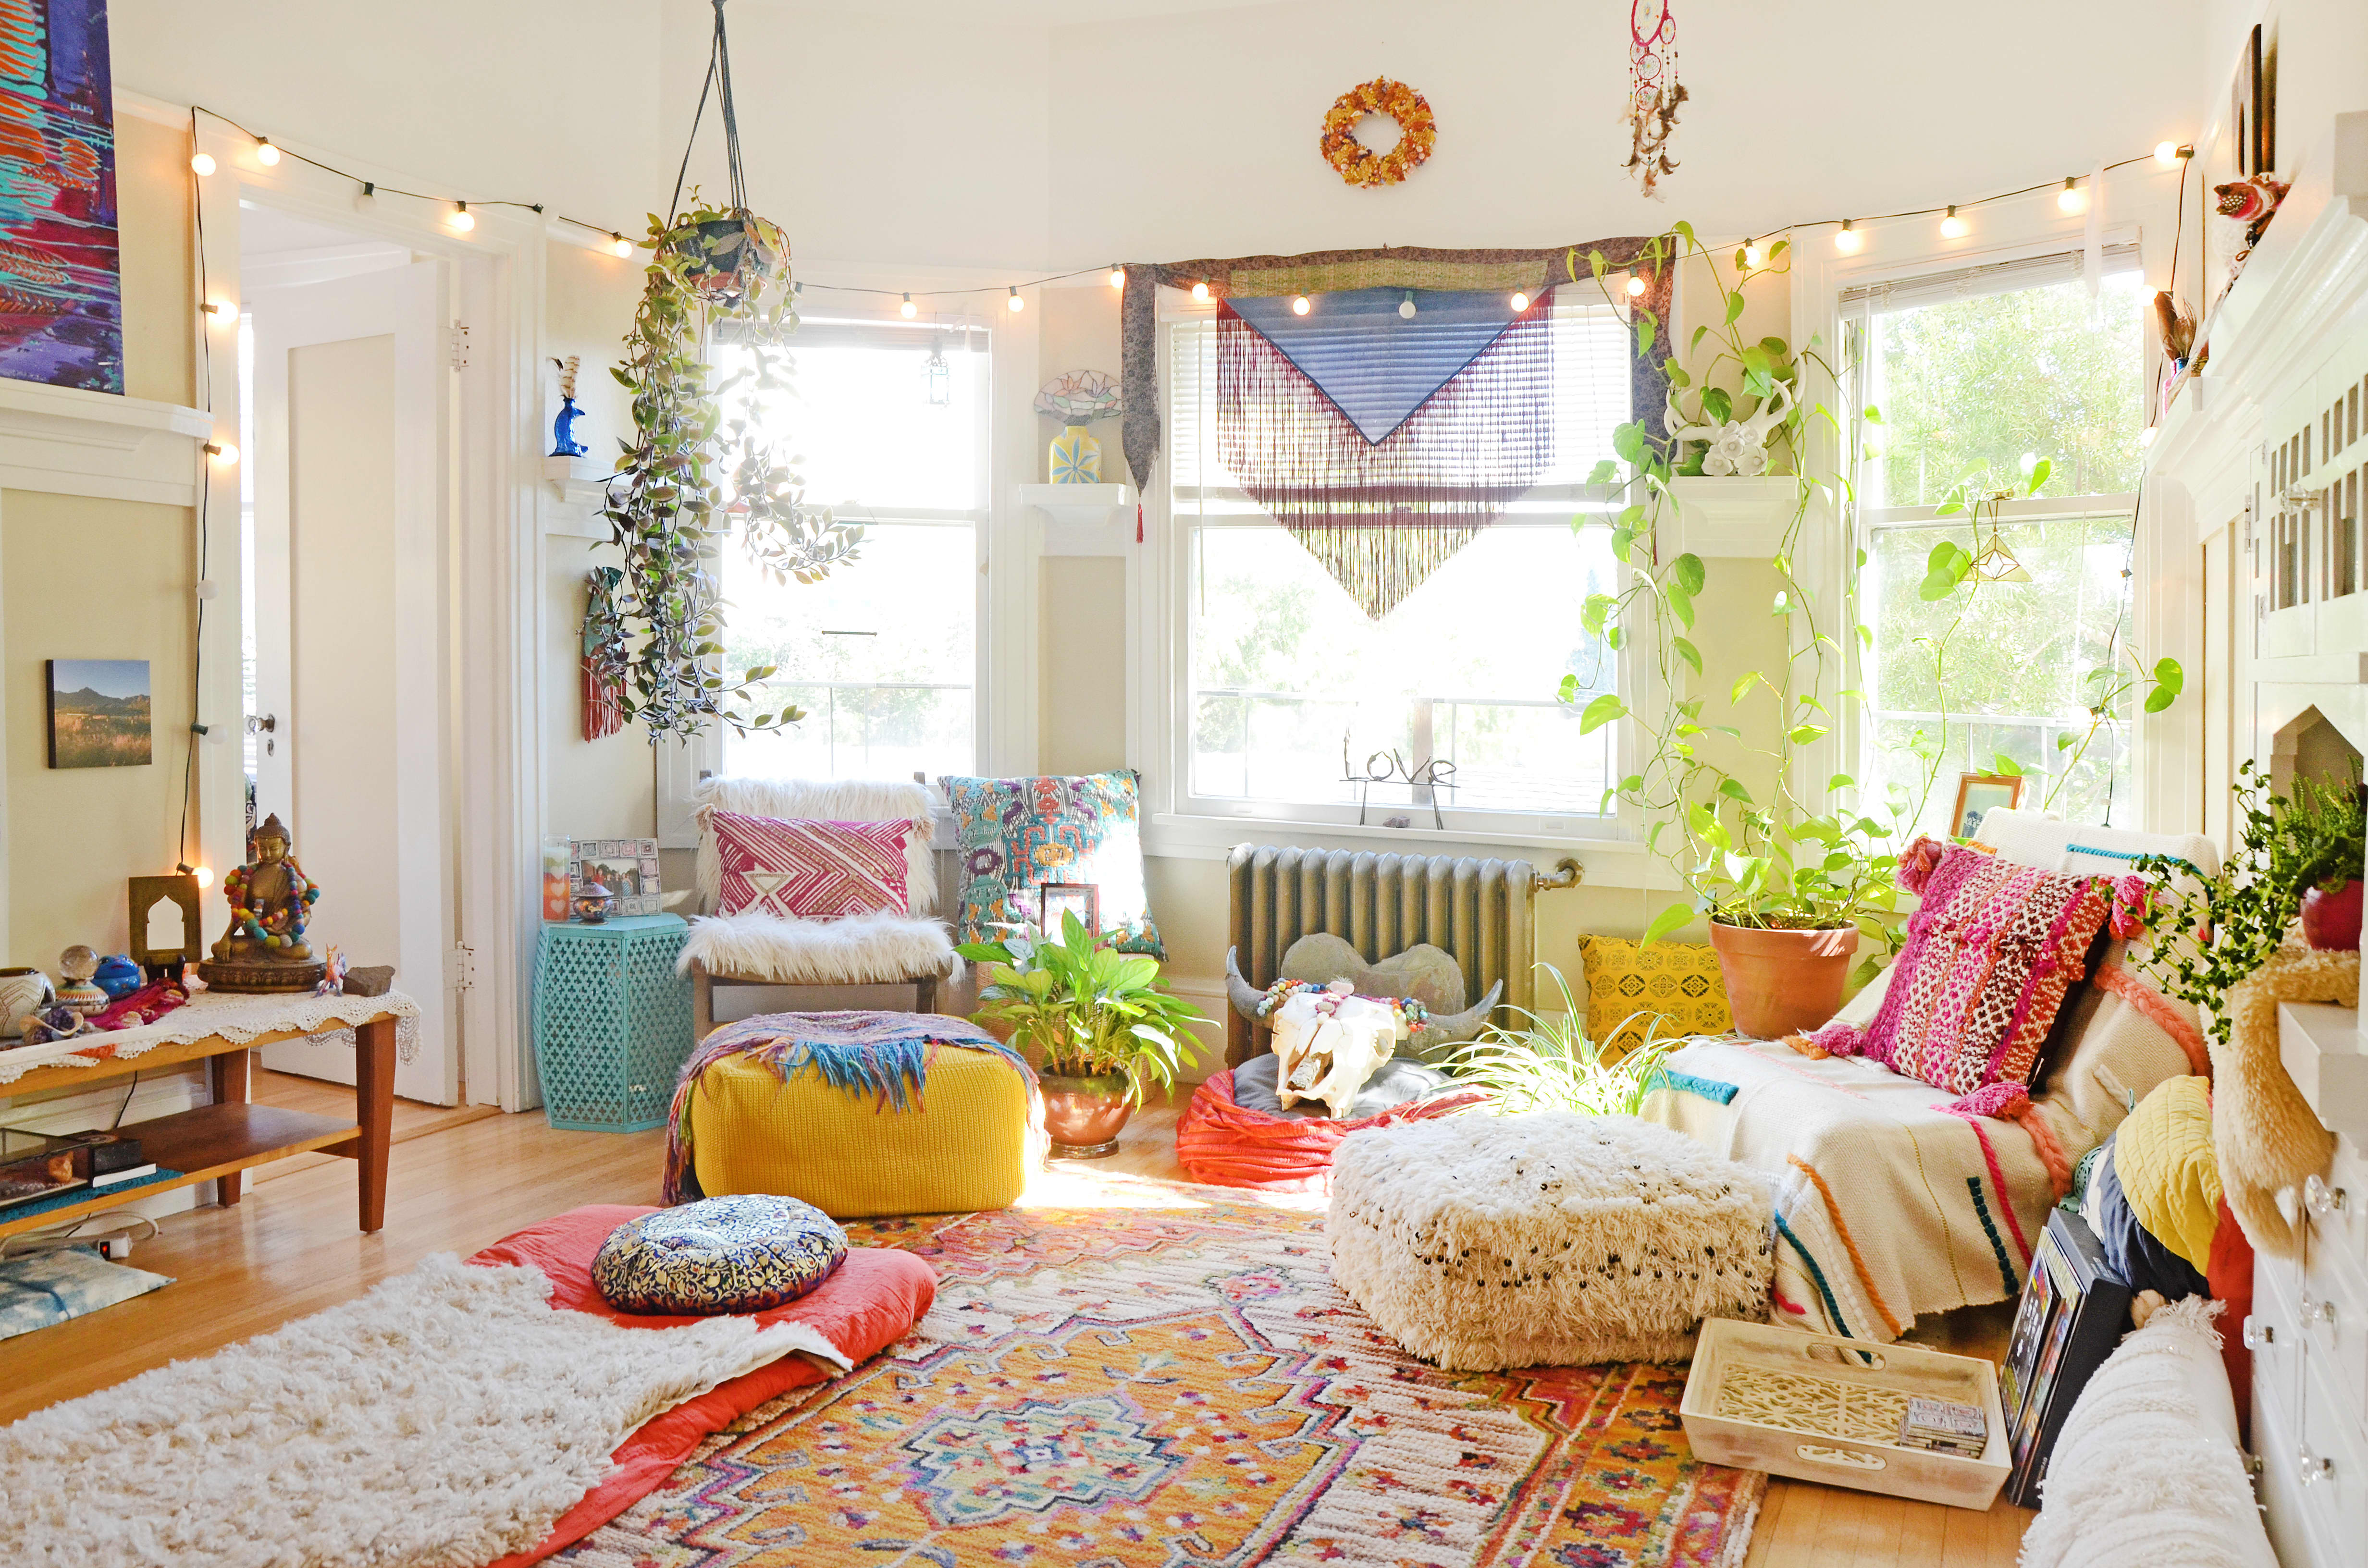 House Tour: A Rainbow-Boho Apartment in Oakland | Apartment Therapy